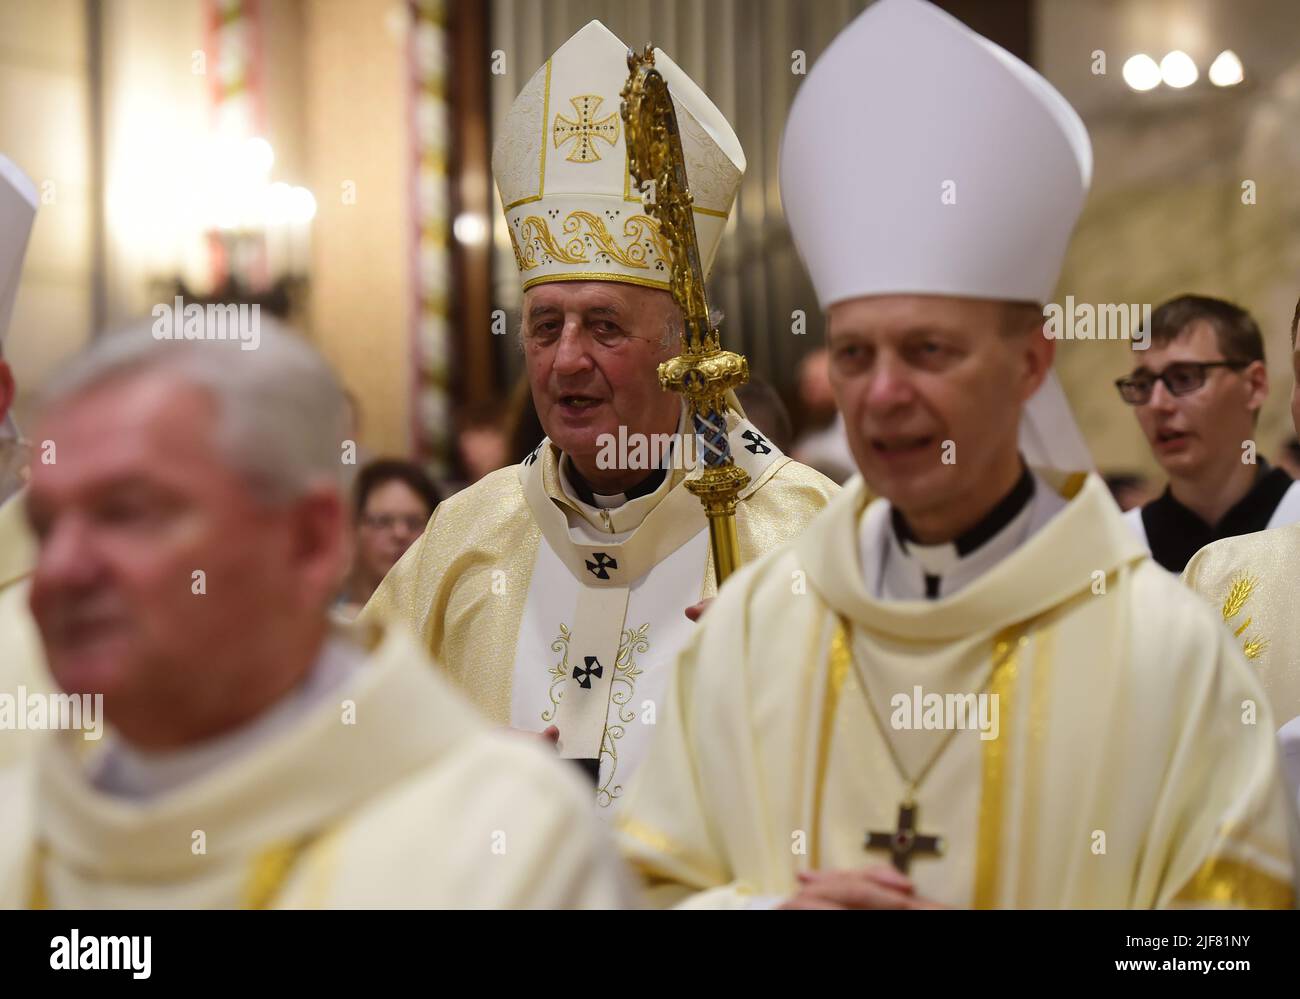 Olomouc, Czech Republic. 30th June, 2022. Farewell mass of Olomouc Archbishop Jan Graubner, center, who will take up position of Prague Archbishop, was held on June 30, 2022, at the Saint Wenceslas Cathedral in Olomouc, Czech Republic. On the right side is seen Auxiliary Bishop Antonin Basler. Credit: Ludek Perina/CTK Photo/Alamy Live News Stock Photo